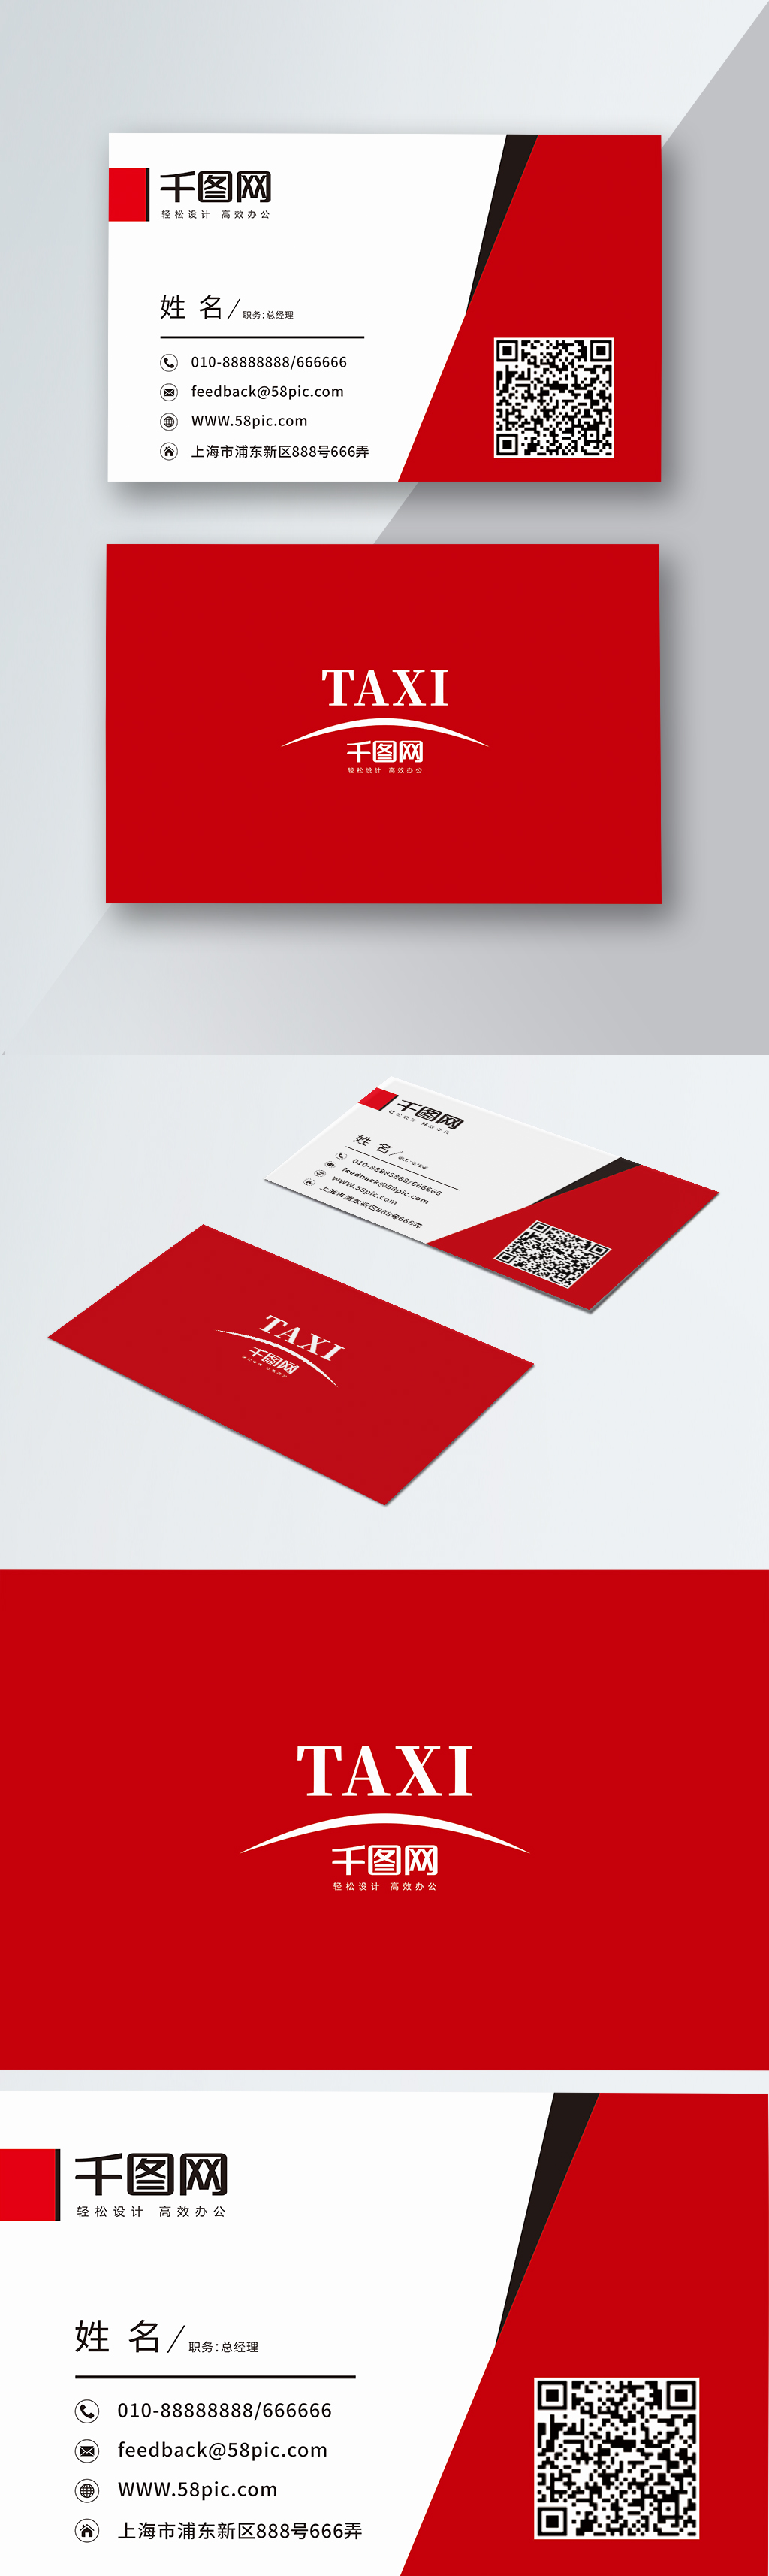 Taxi business card red qr code template image_picture free download ...